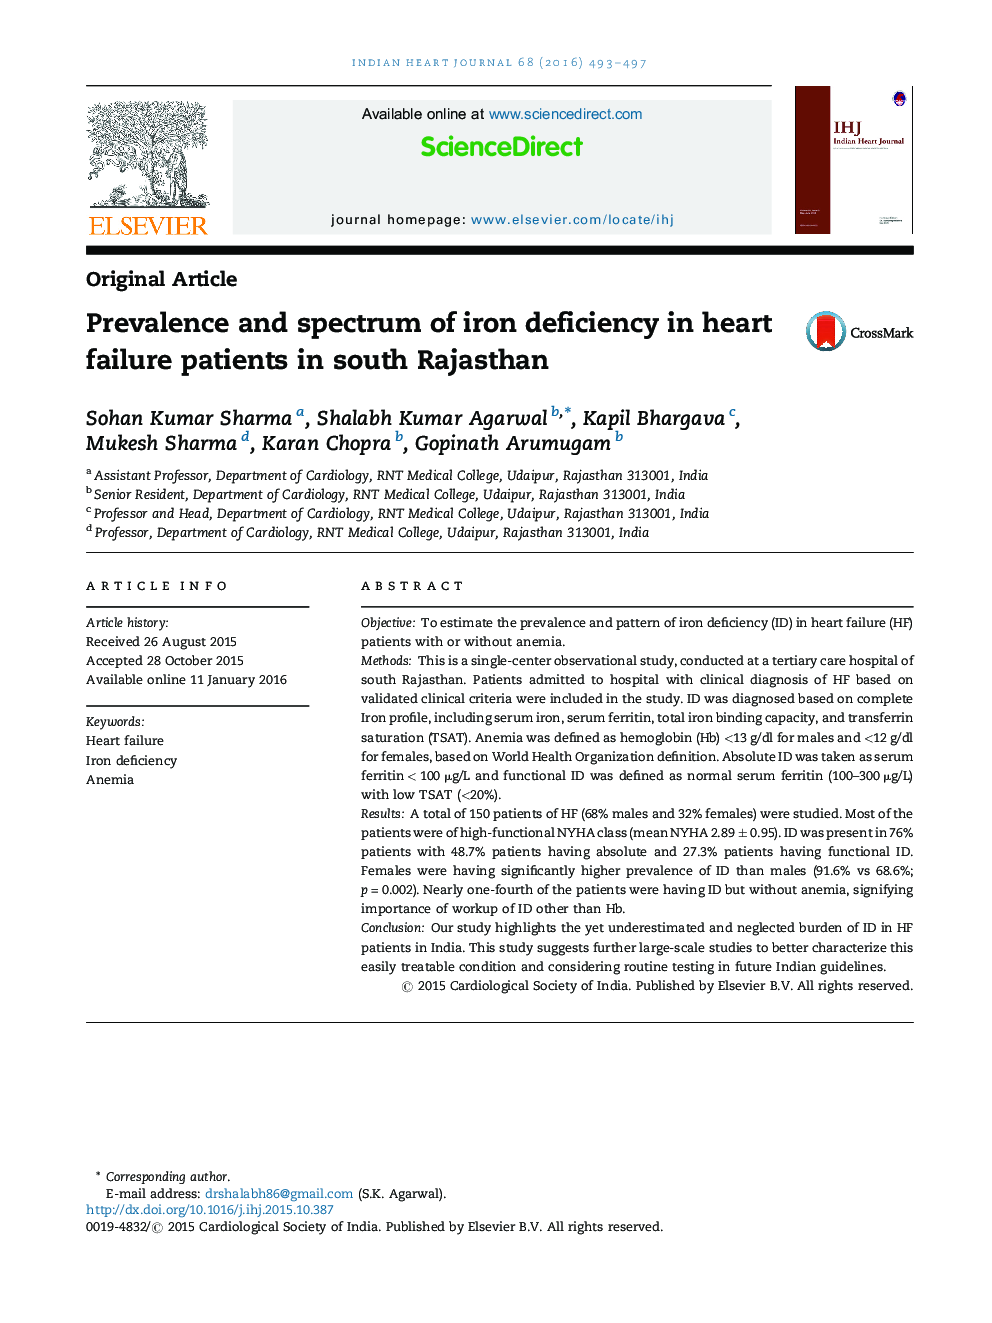 Prevalence and spectrum of iron deficiency in heart failure patients in south Rajasthan